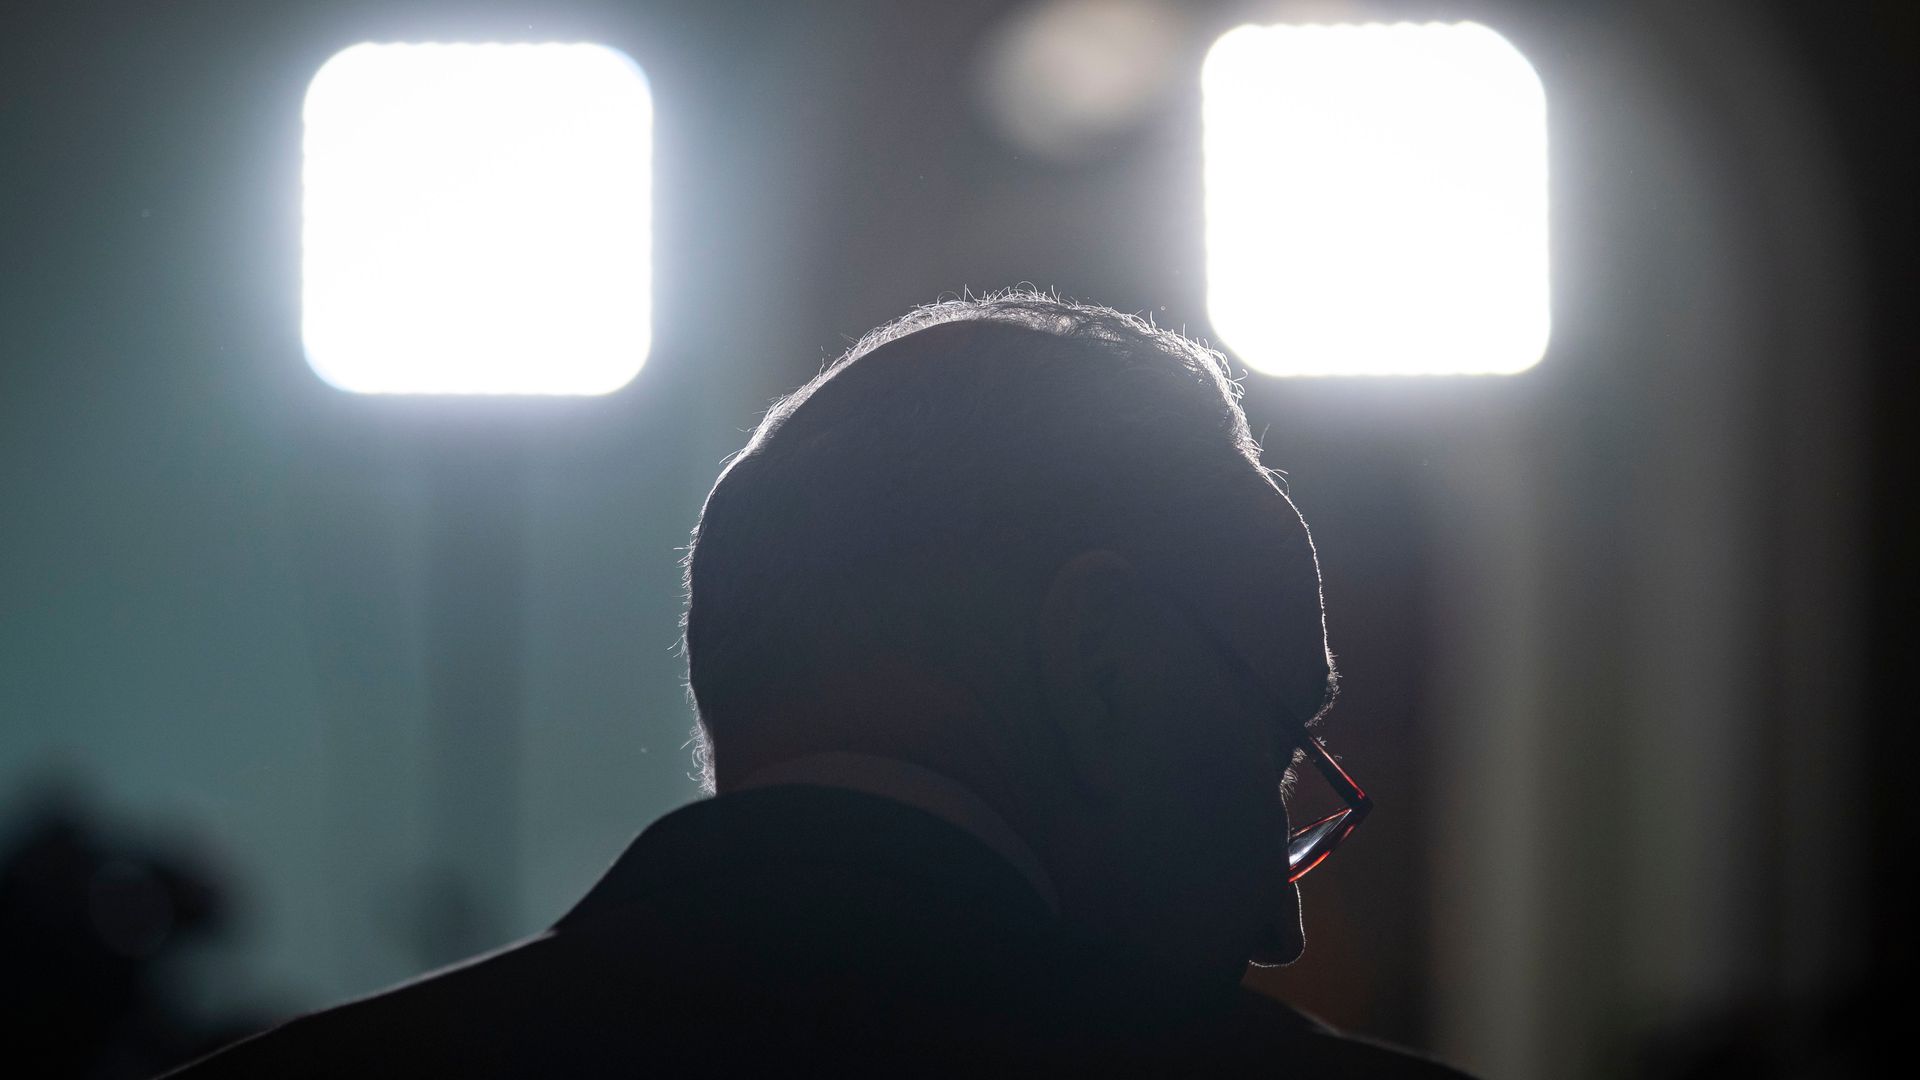 Senate Majority Leader Chuck Schumer is seen in silhouette set by television lights.